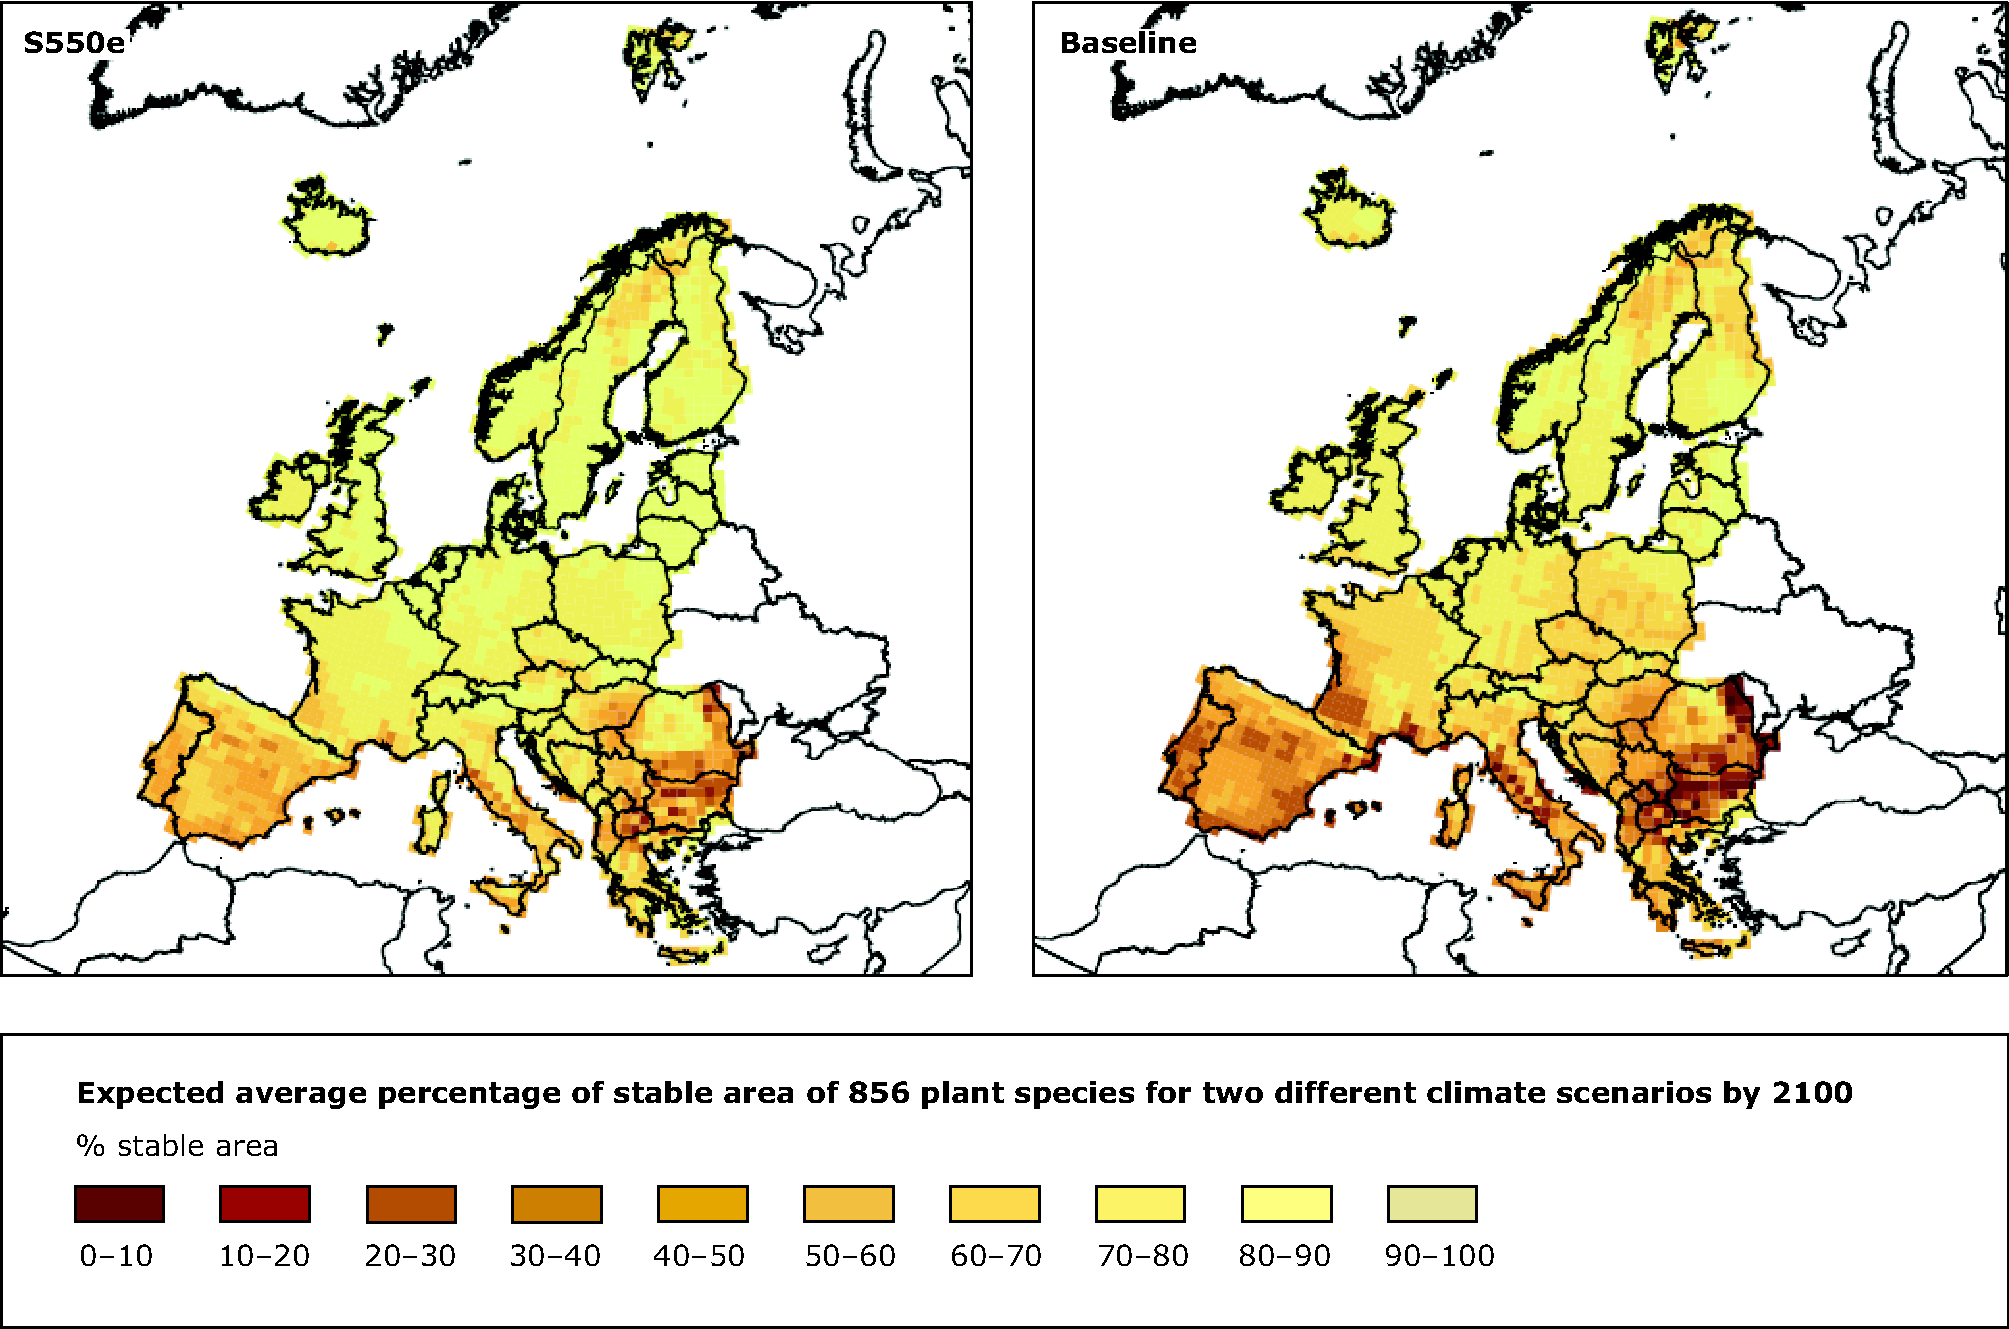 Expected average percentage of stable area of 856 plant species for two different climate scenarios